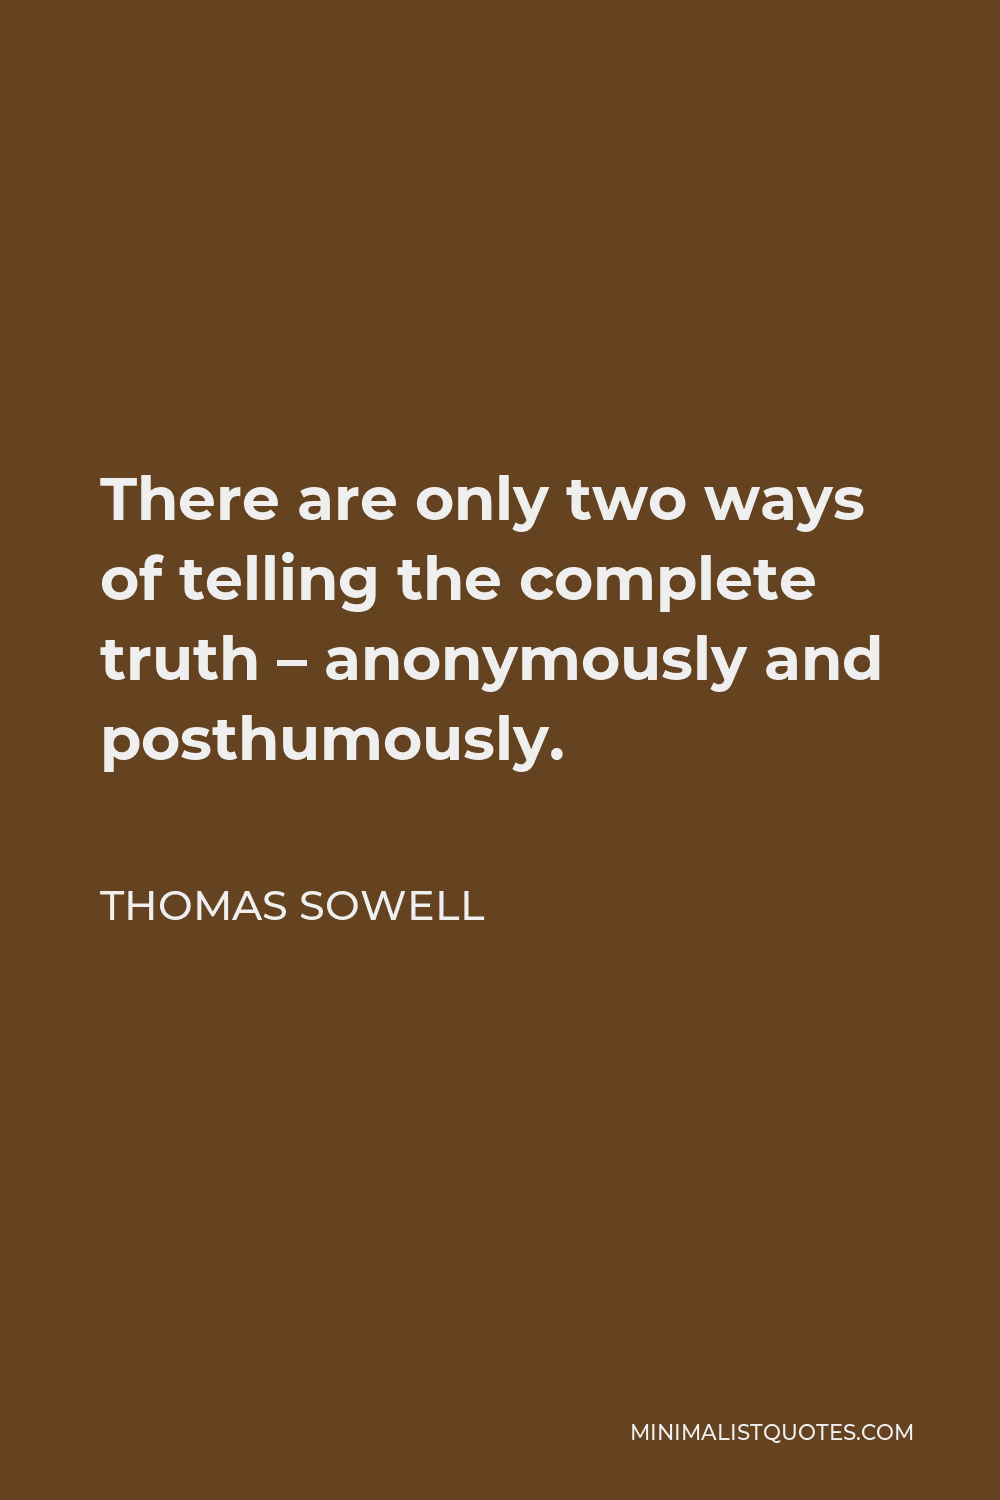 Thomas Sowell Quote - There are only two ways of telling the complete truth – anonymously and posthumously.